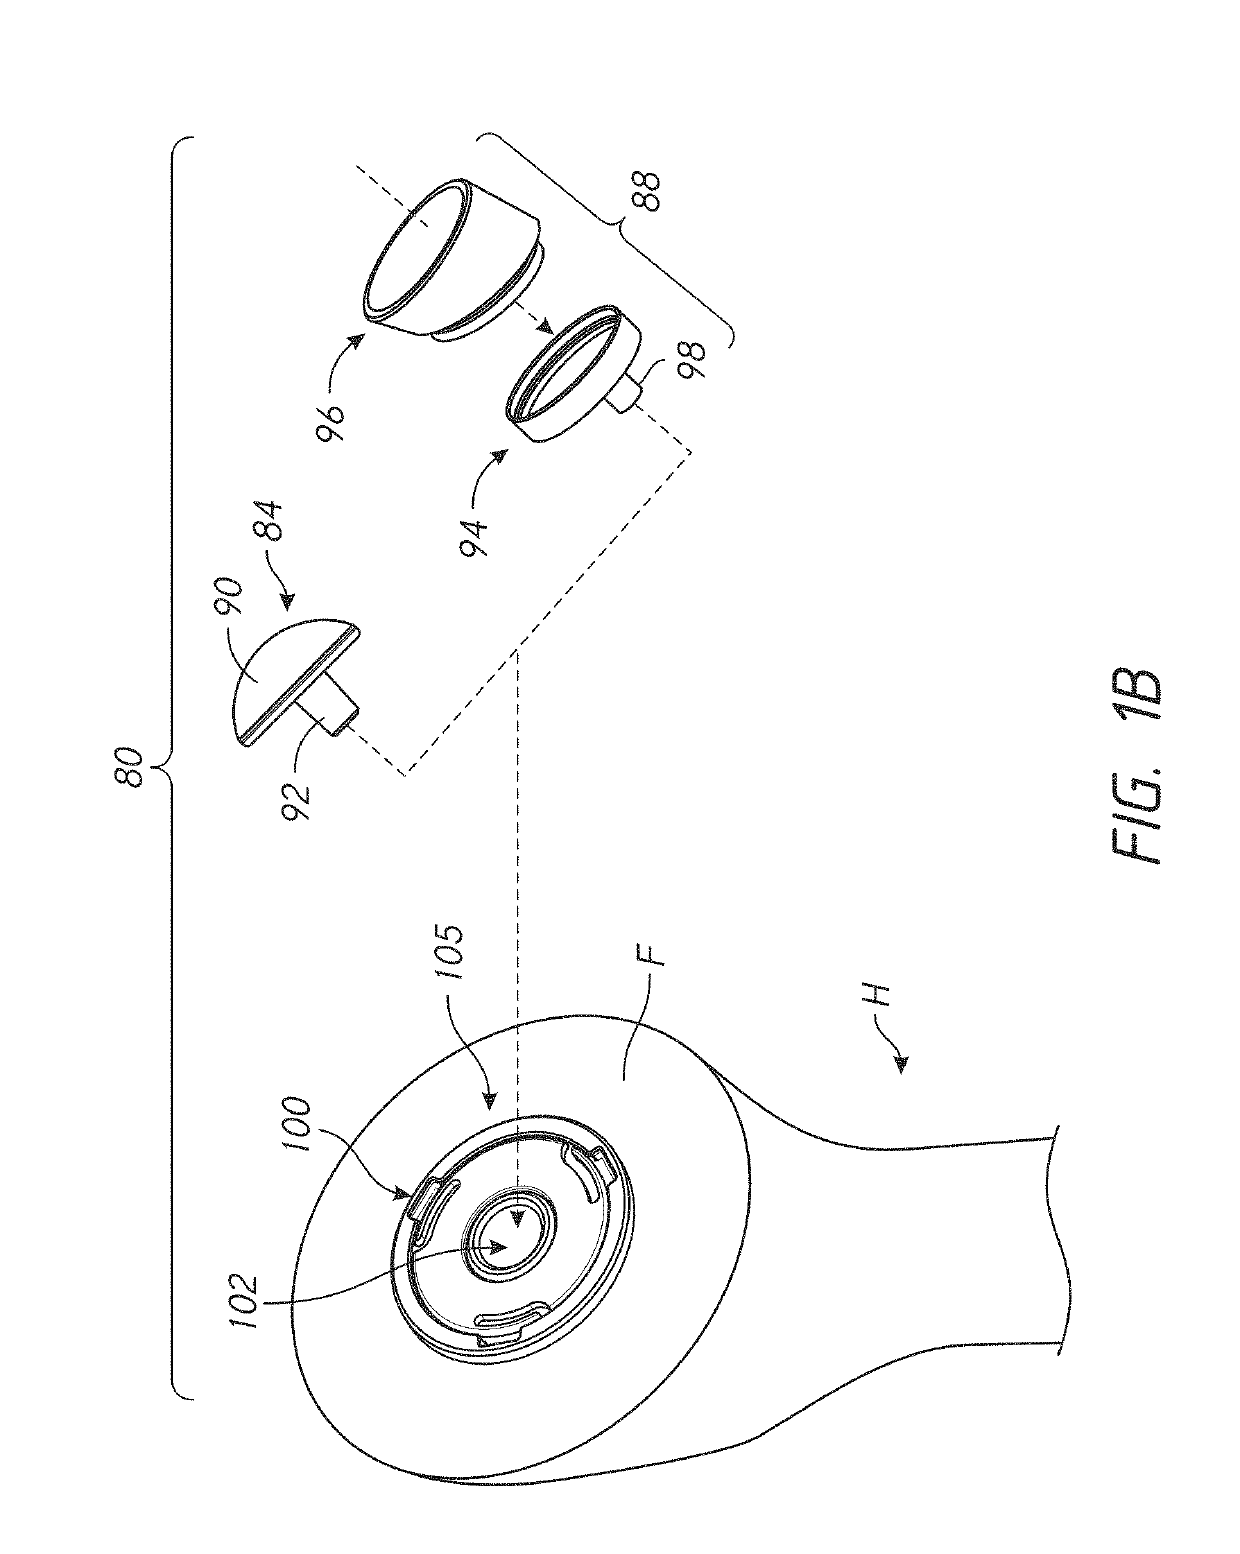 Stemless prosthesis anchor components, methods, and kits